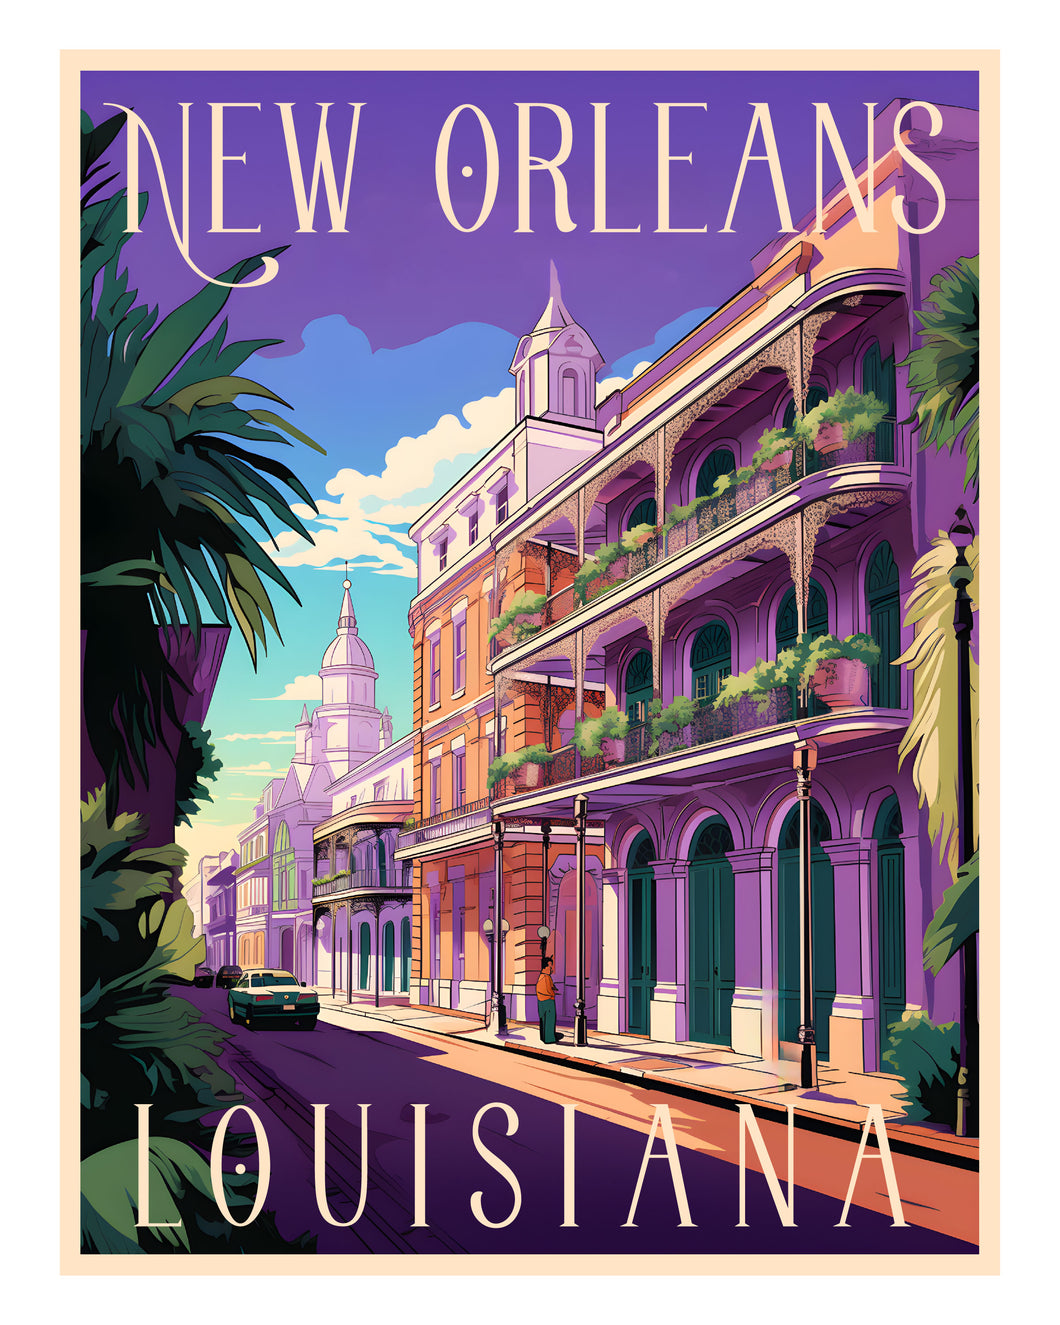 Exclusive New Orleans Louisiana Collectible - Vintage Travel Poster Art